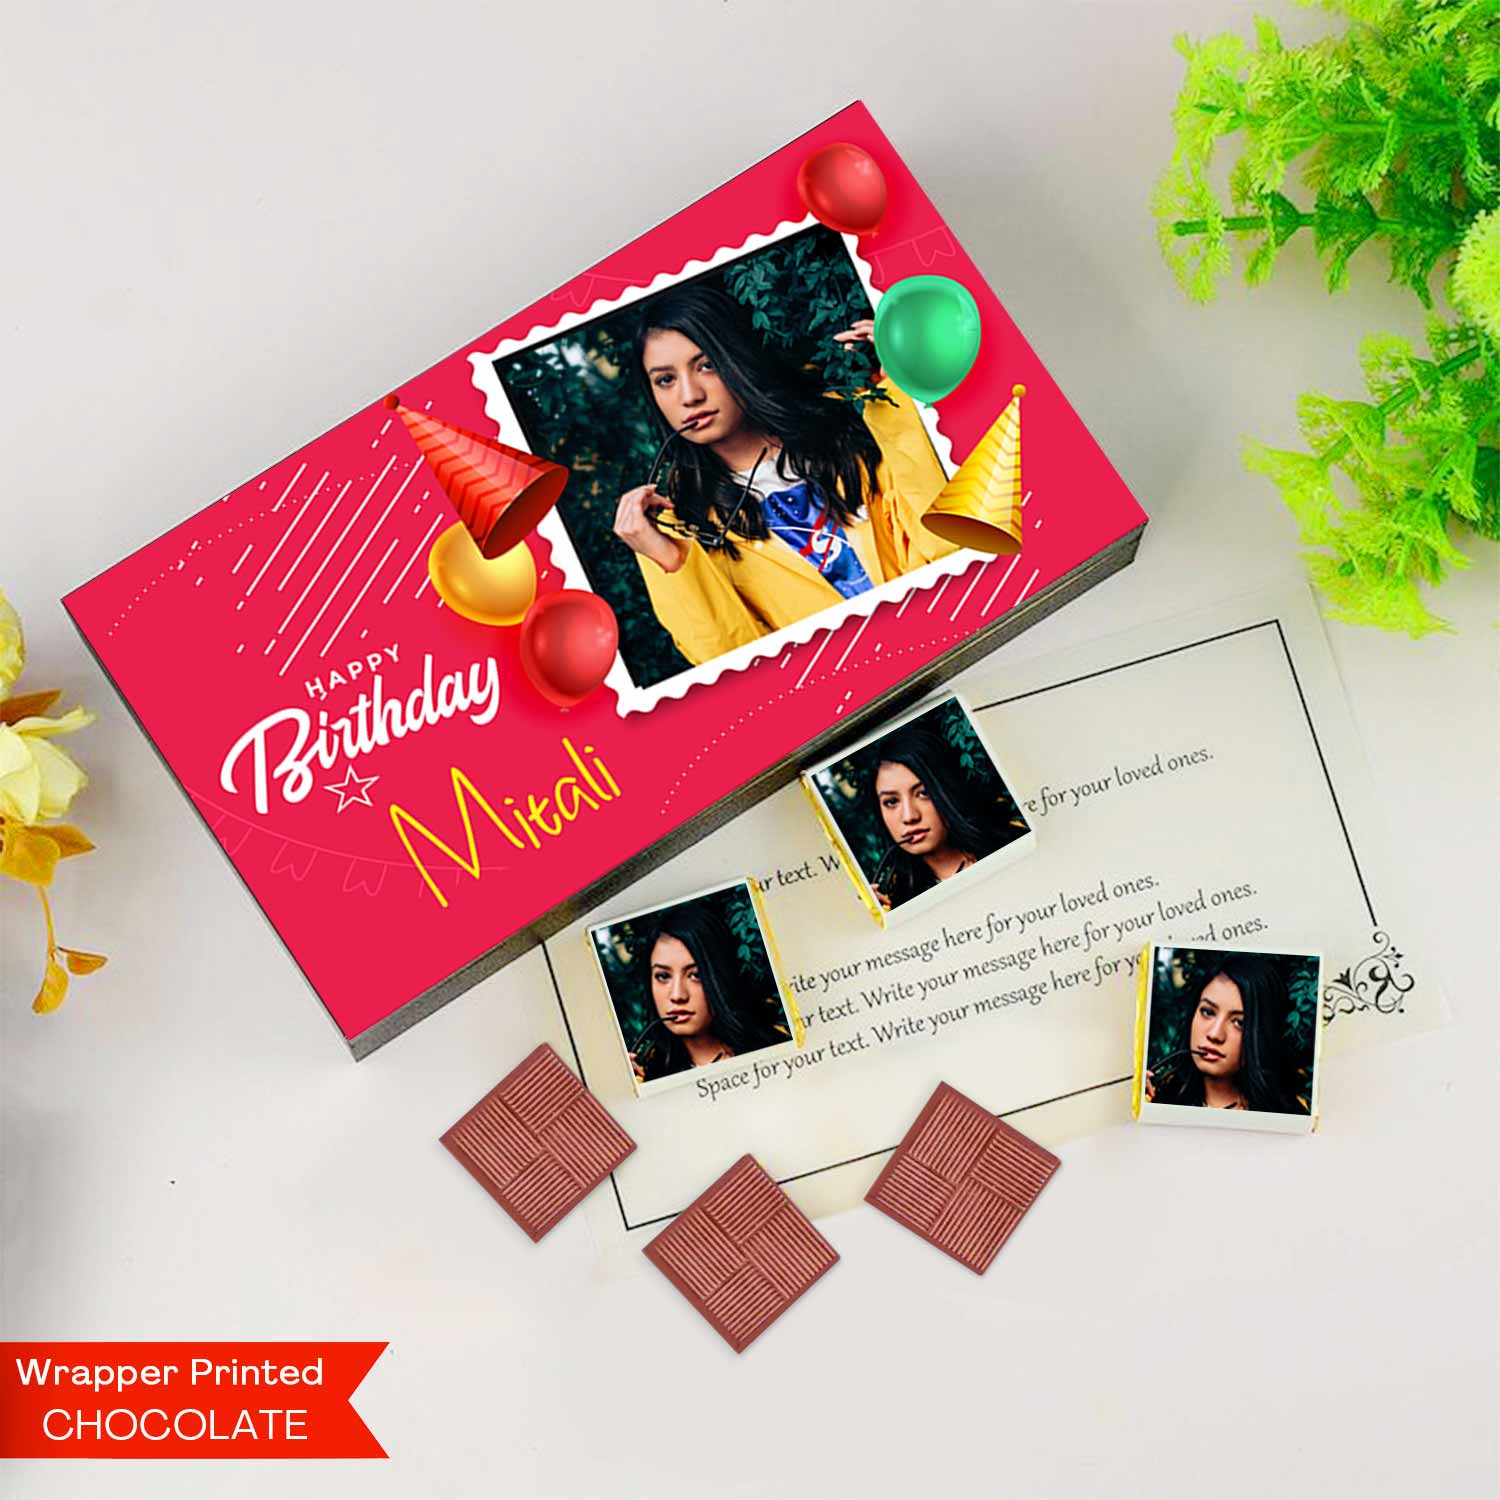  personalised chocolates with photo personalised chocolate box personalised chocolates with names customized chocolate box near me personalised chocolates for birthdays customized chocolate wrappers personalised chocolates with photo india customized chocolate gifts